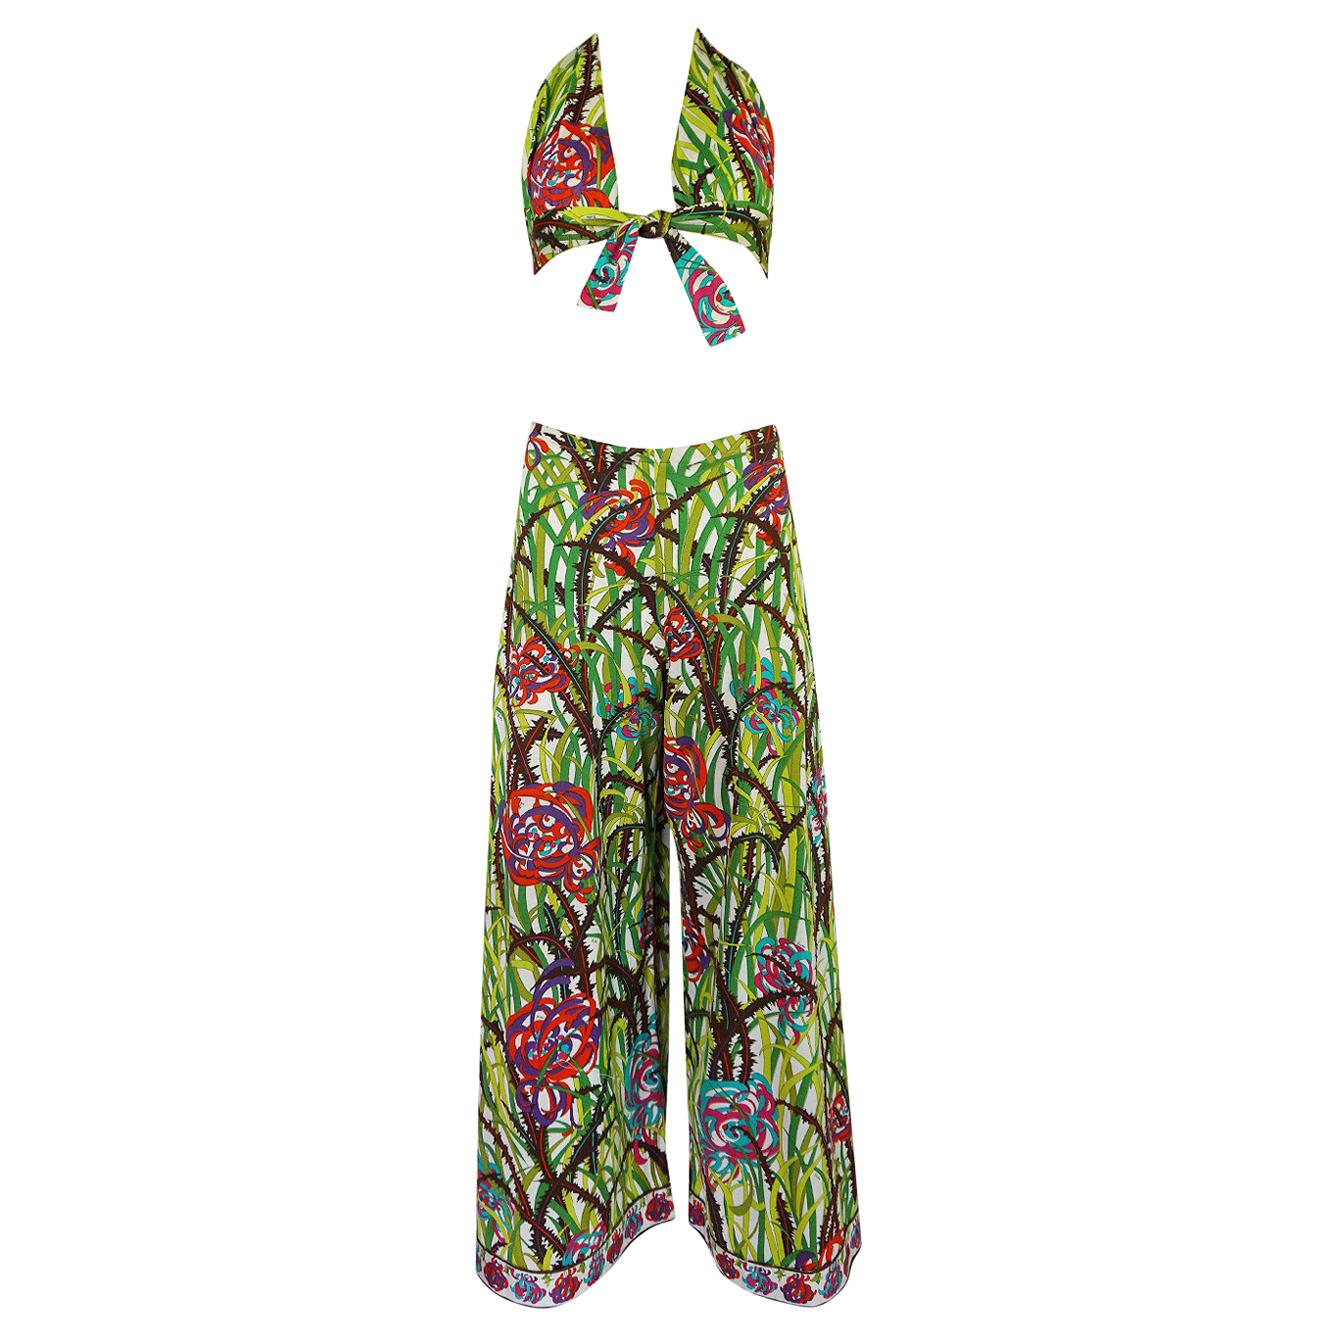 Pucci Rare Printed Cotton Halter Top and Wide Leg Pant Set, 1960s 